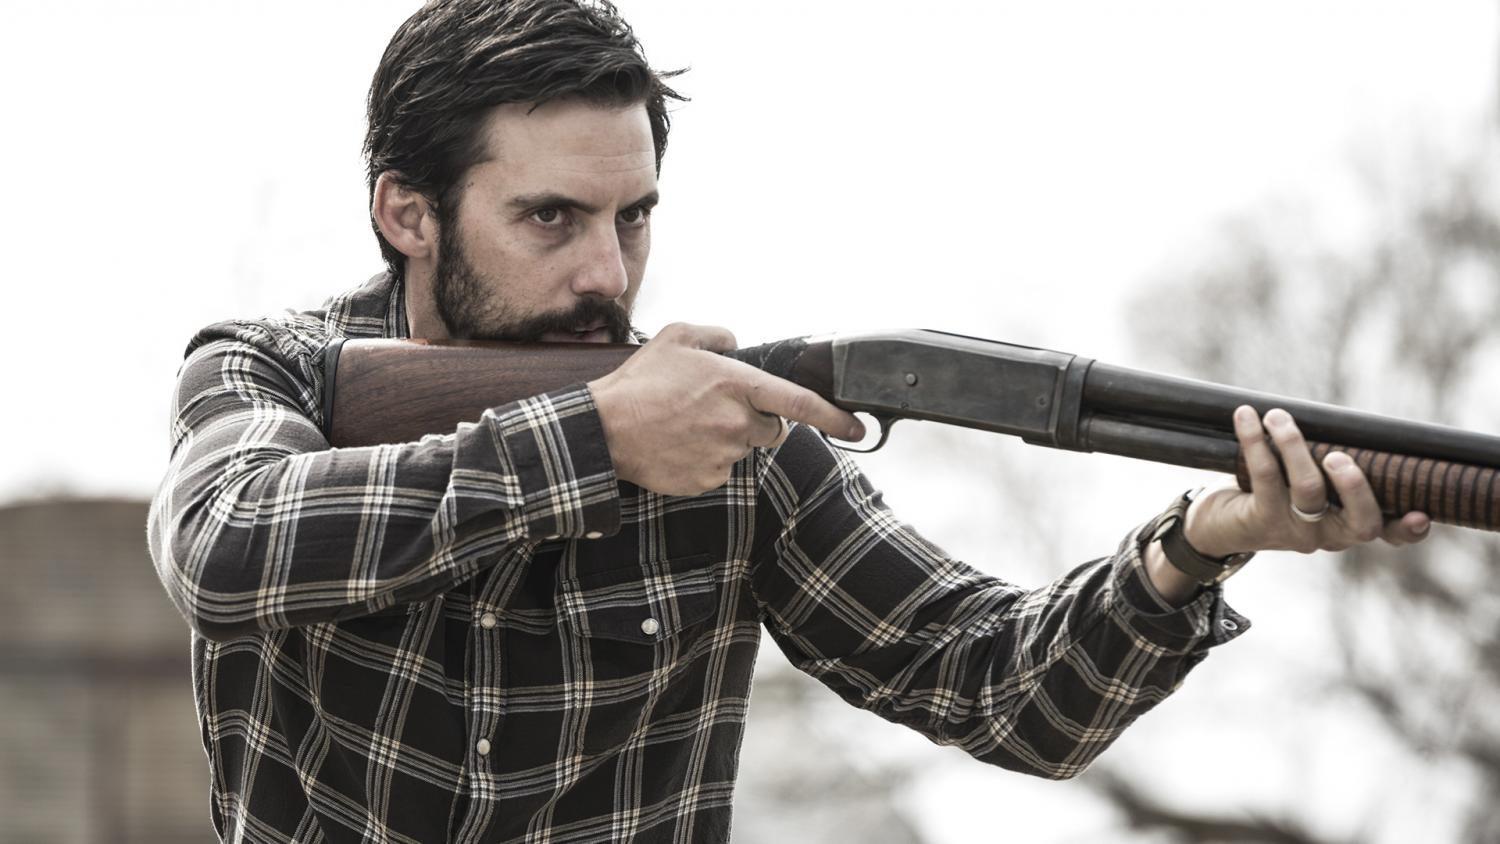 Milo Ventimiglia stars as the mysterious Jackson Pritchard living on the outskirts of Clay Staub’s new film, “Devils Gate.”